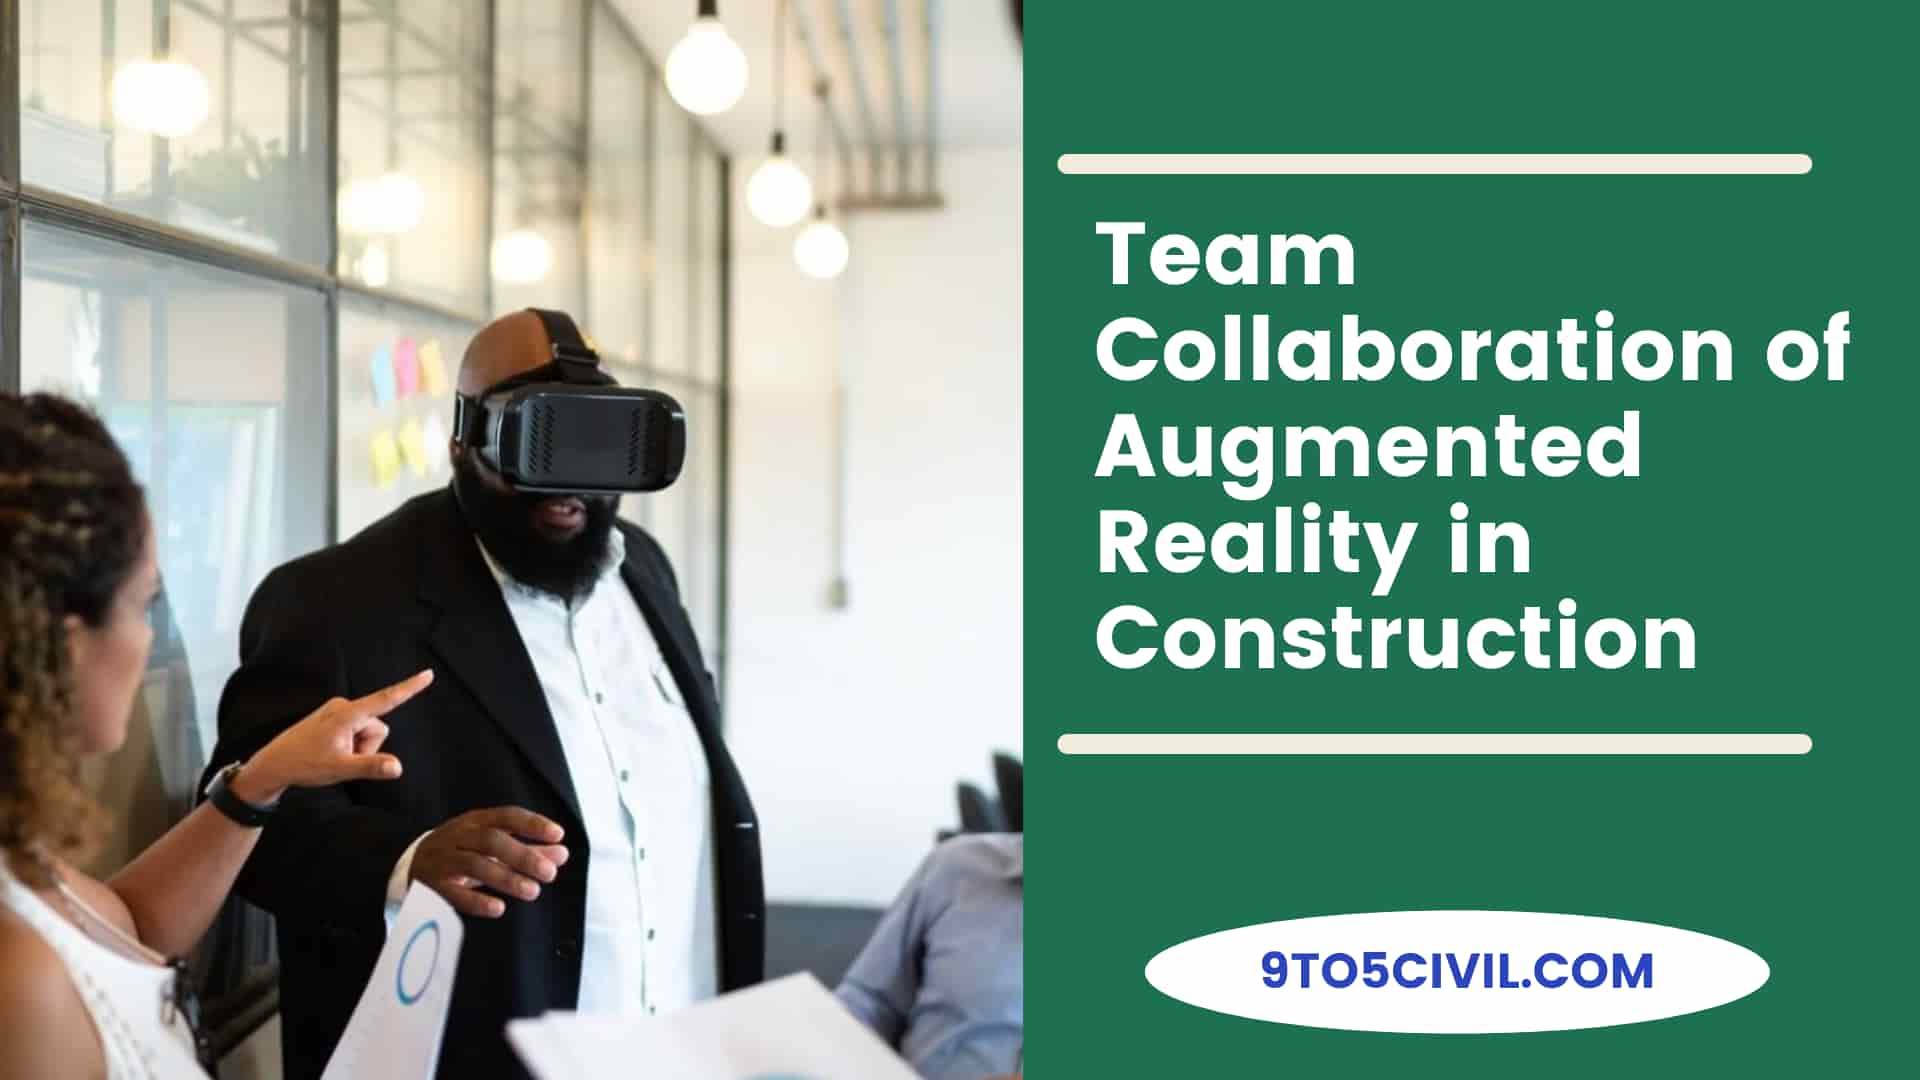 Team Collaboration of Augmented Reality in Construction